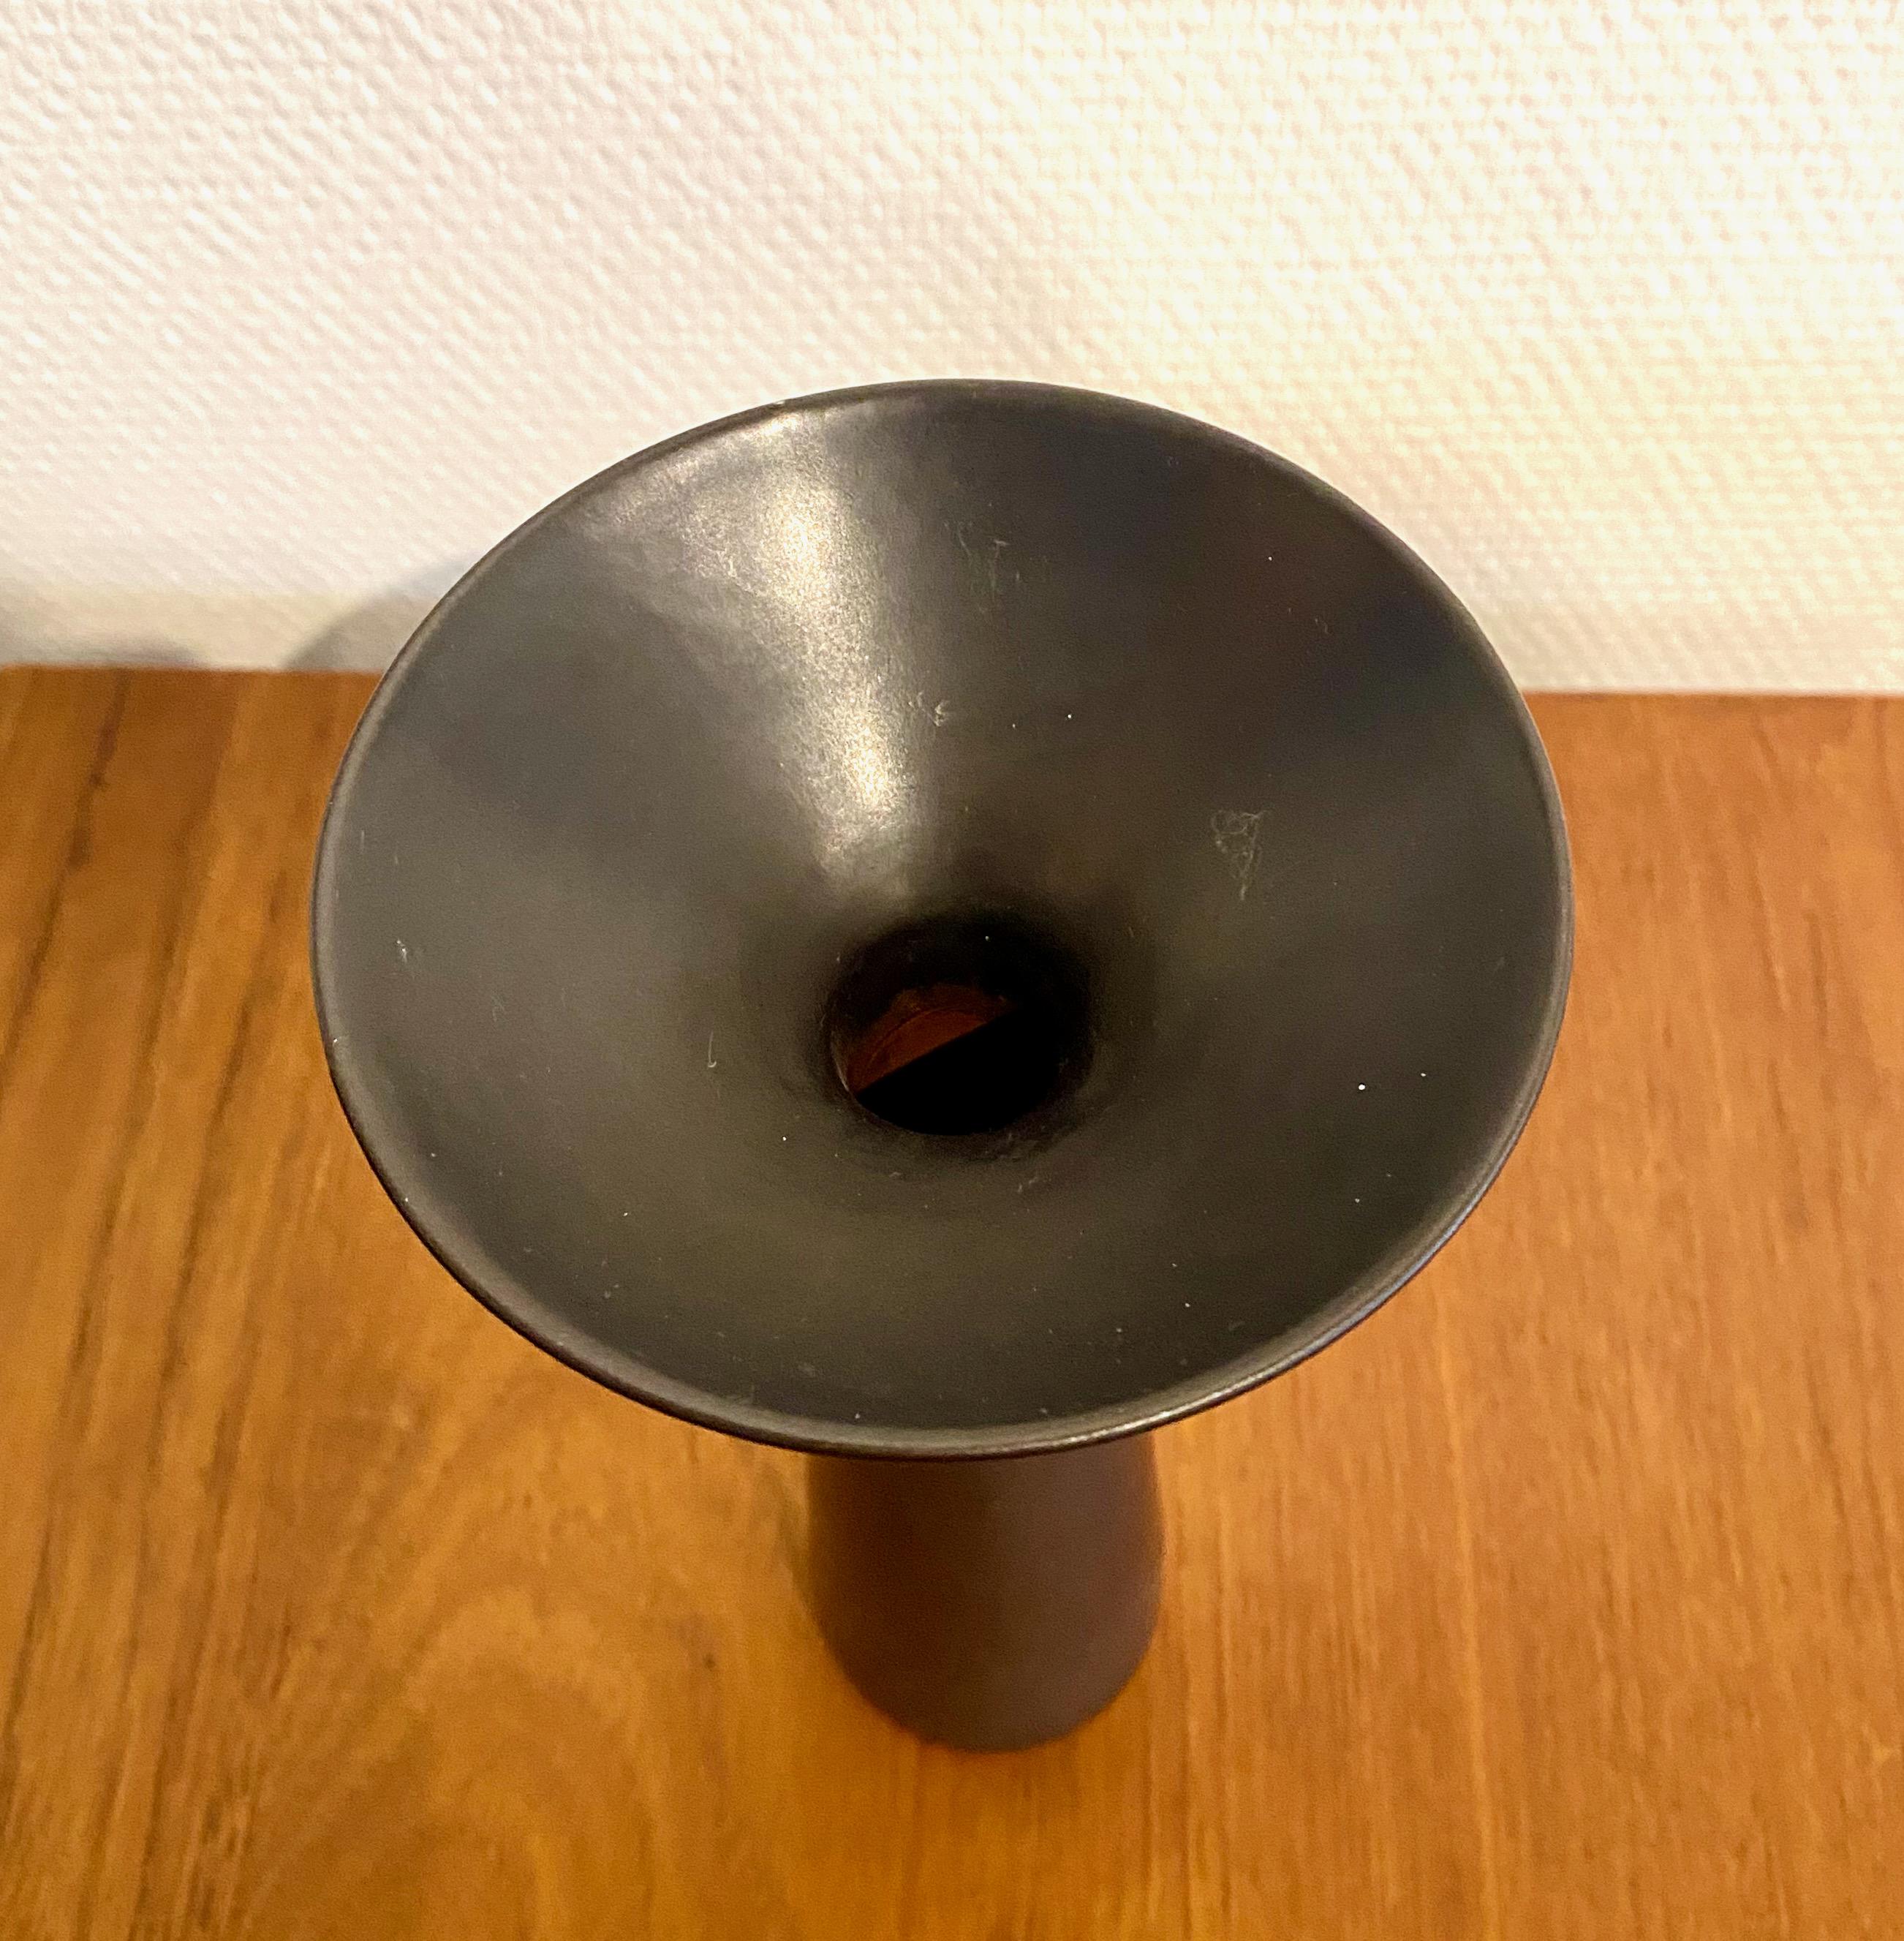 Black stoneware vase designed by Carl-Harry Stålhane for Rörstrand Sweden. The black items by Stålhane has become highly sought after by collectors.